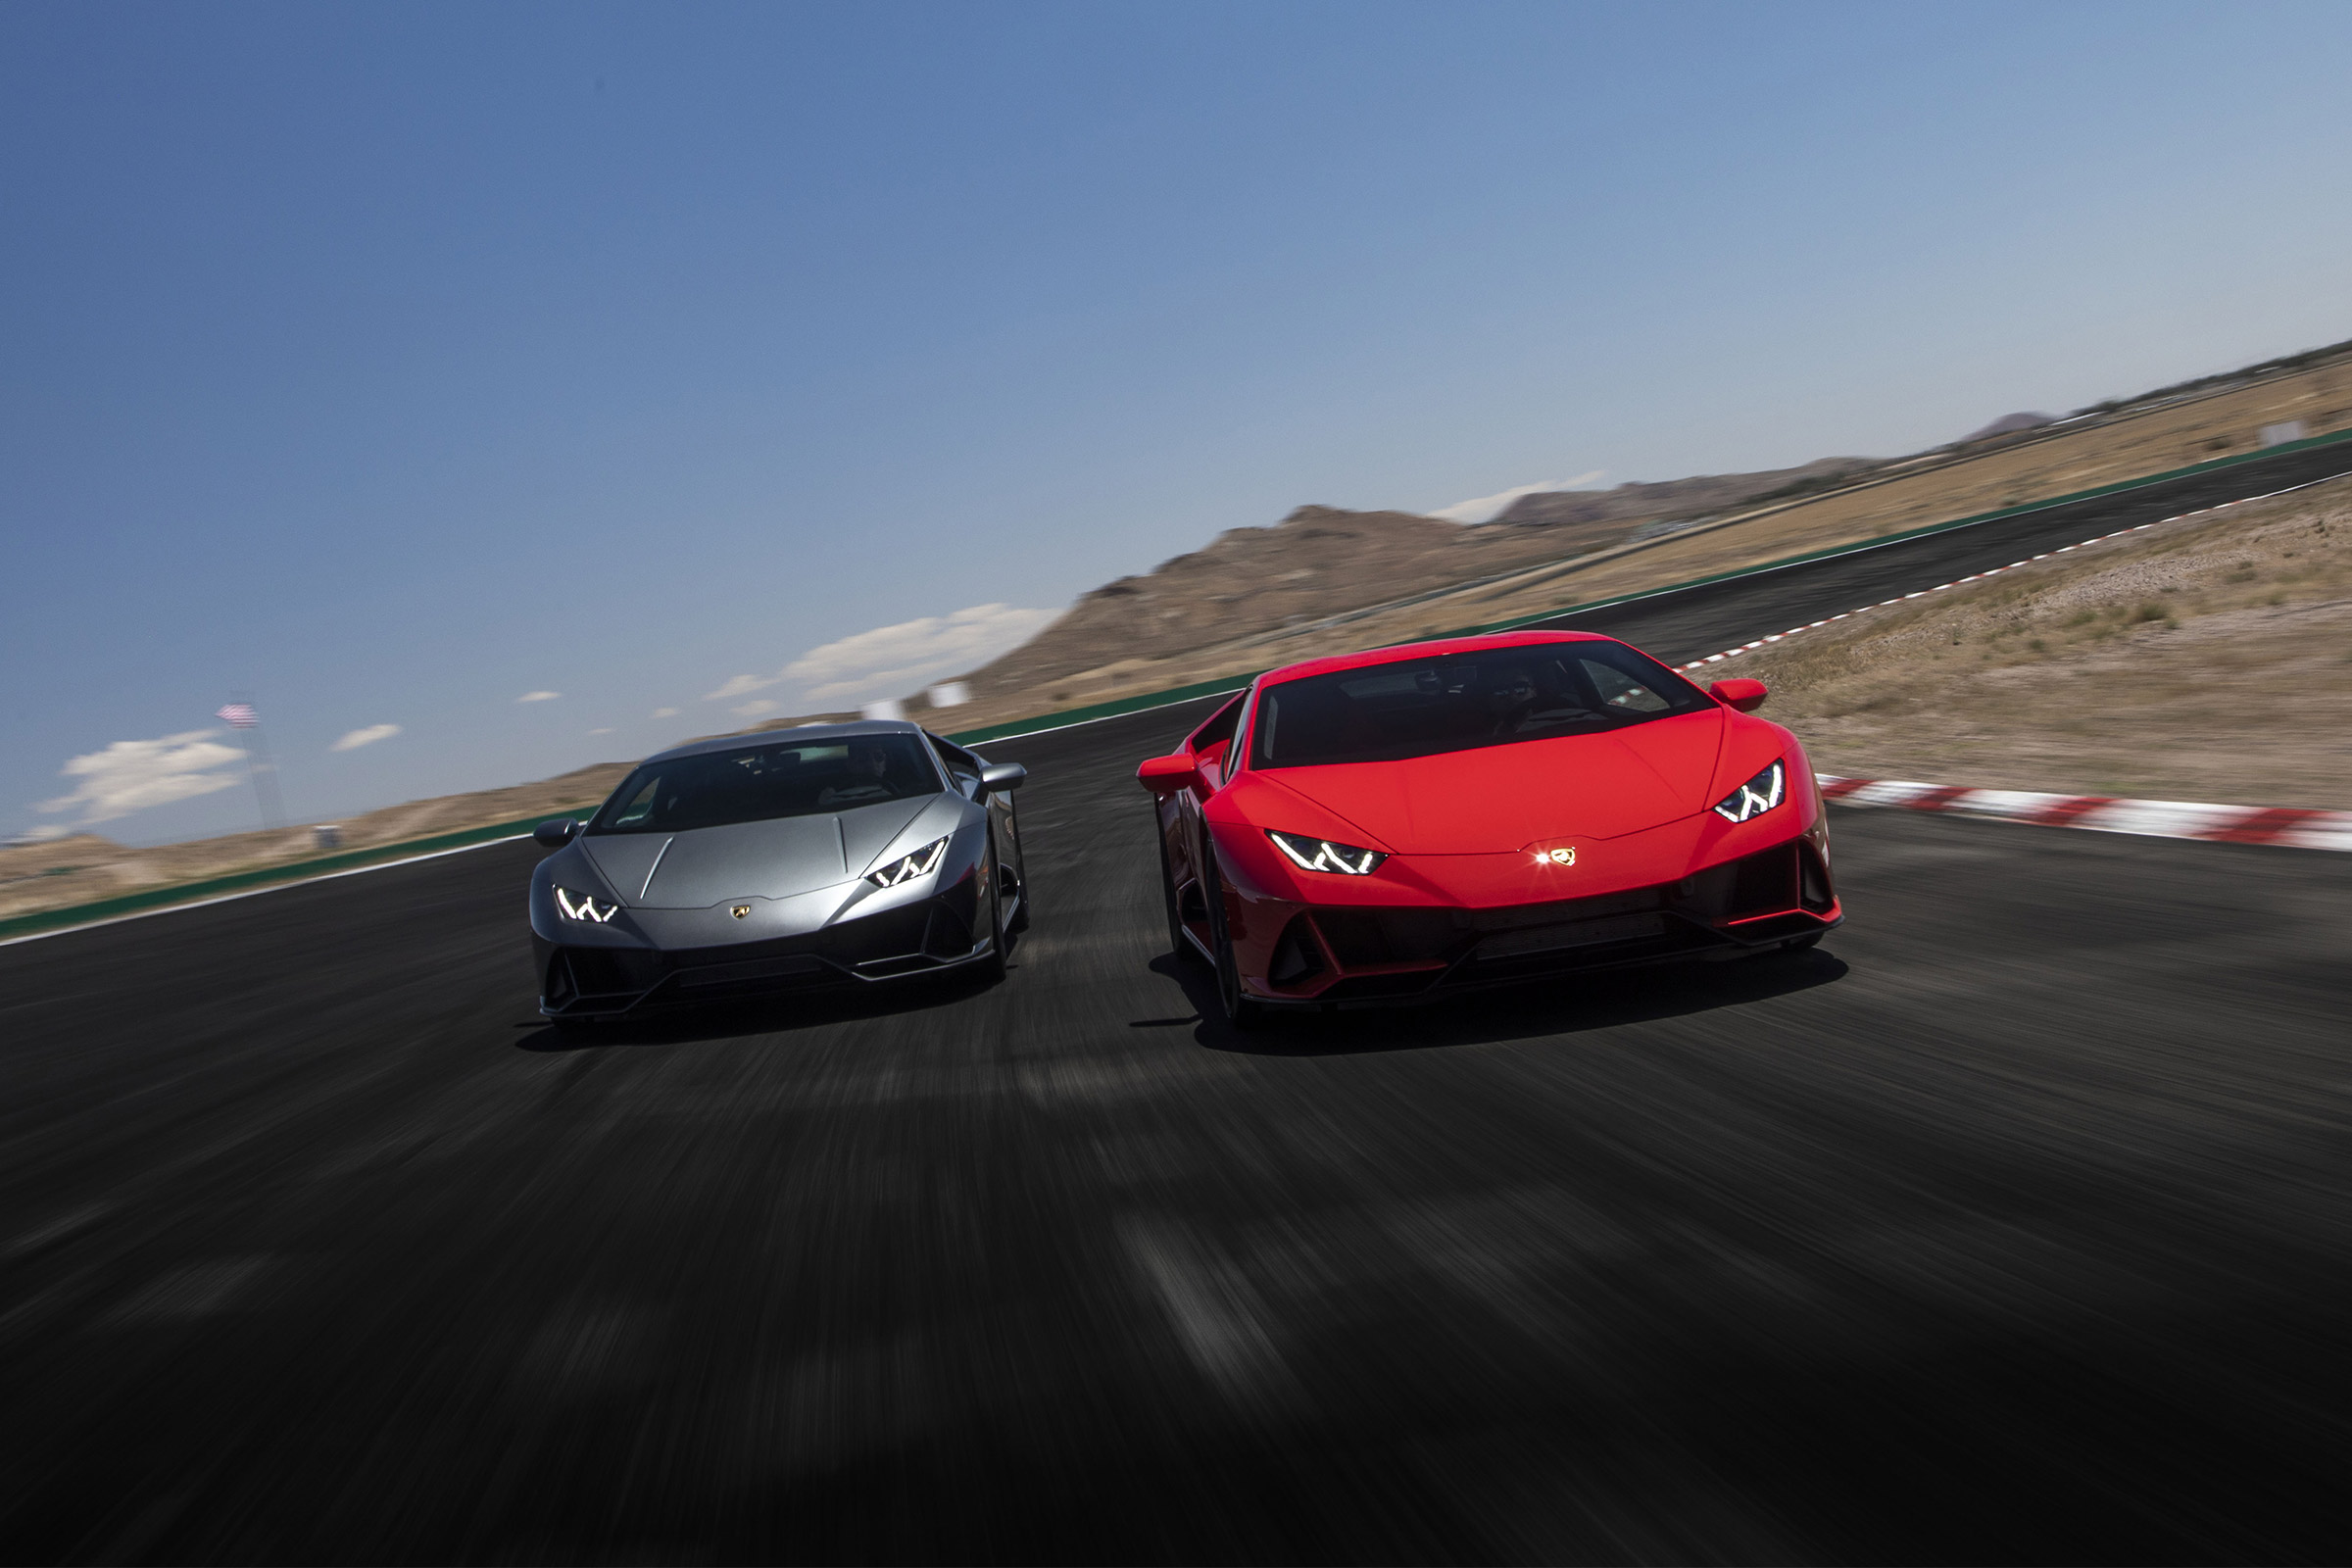 Lamborghini introduces two new models – the world rejoices